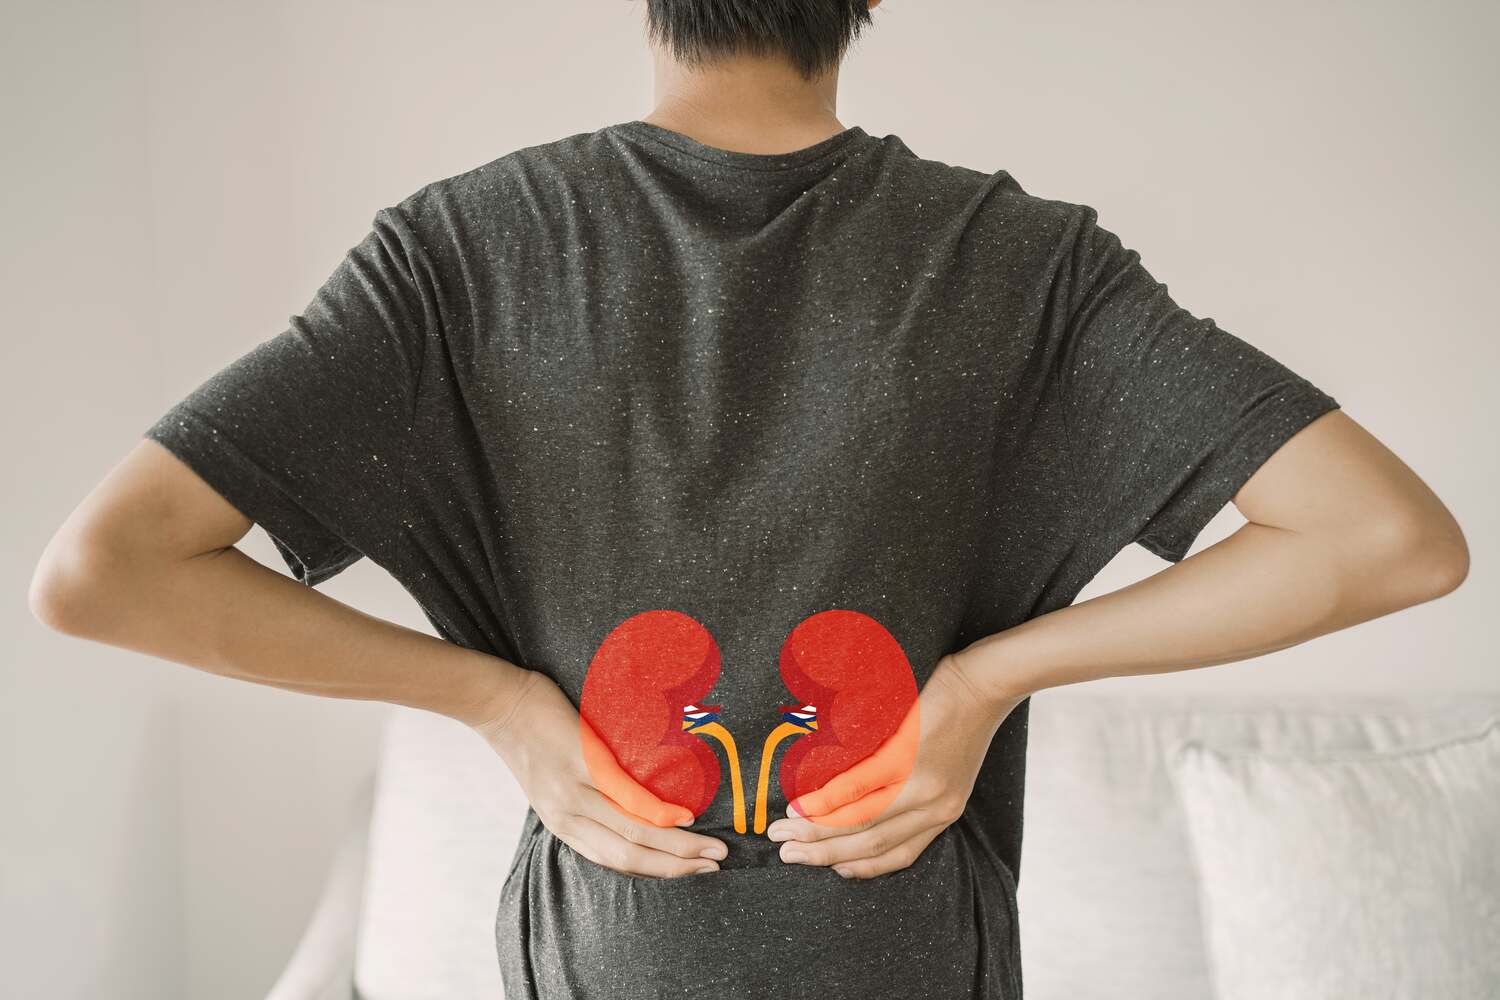 Kids may complain of back pain if they have stones in kidney